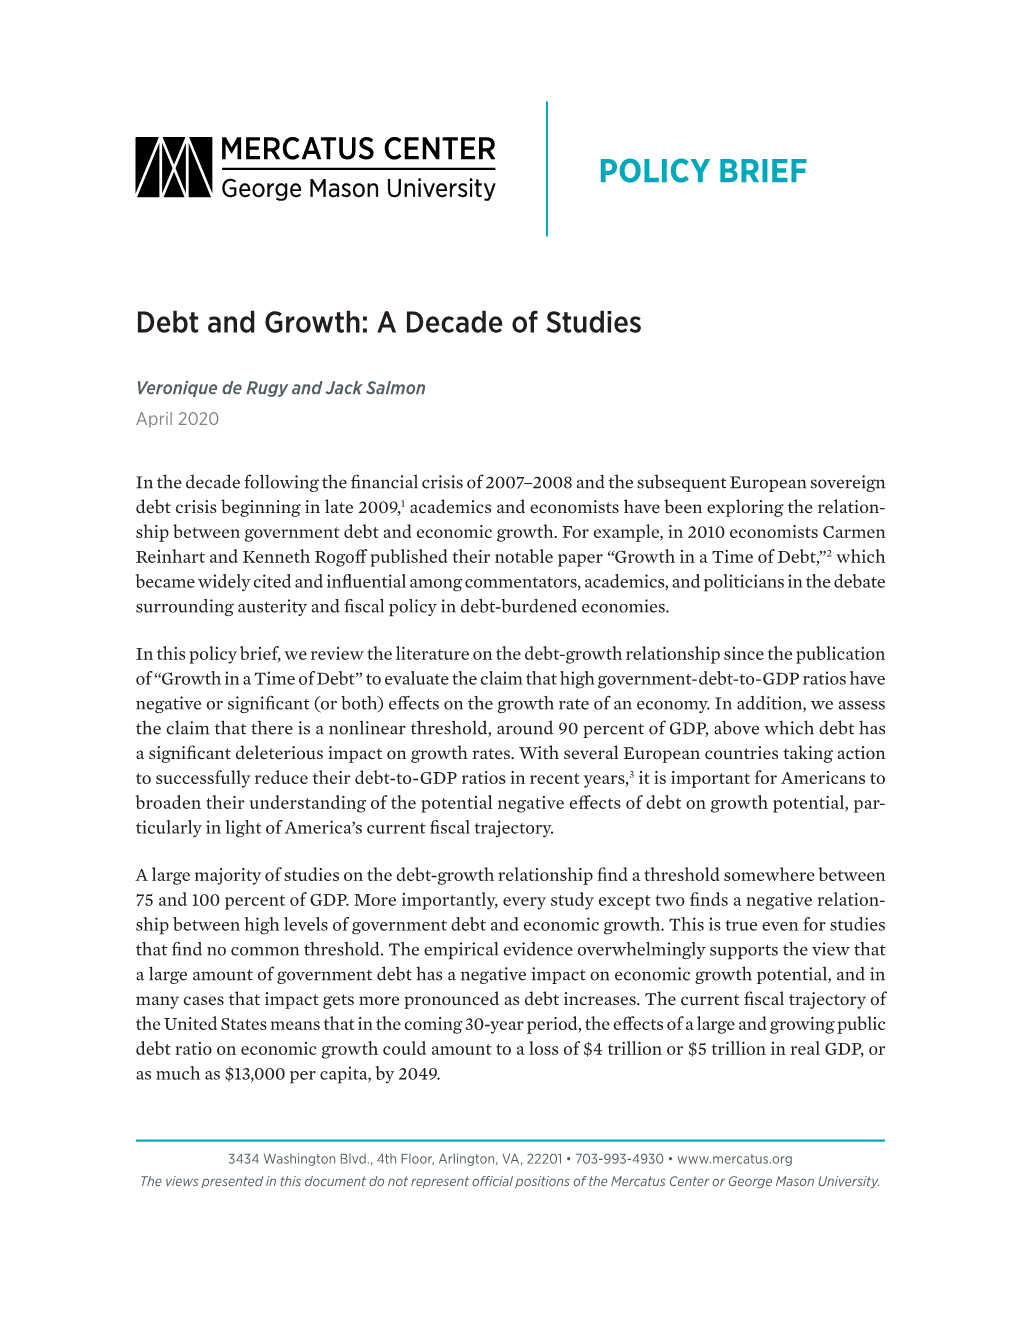 Debt and Growth: a Decade of Studies